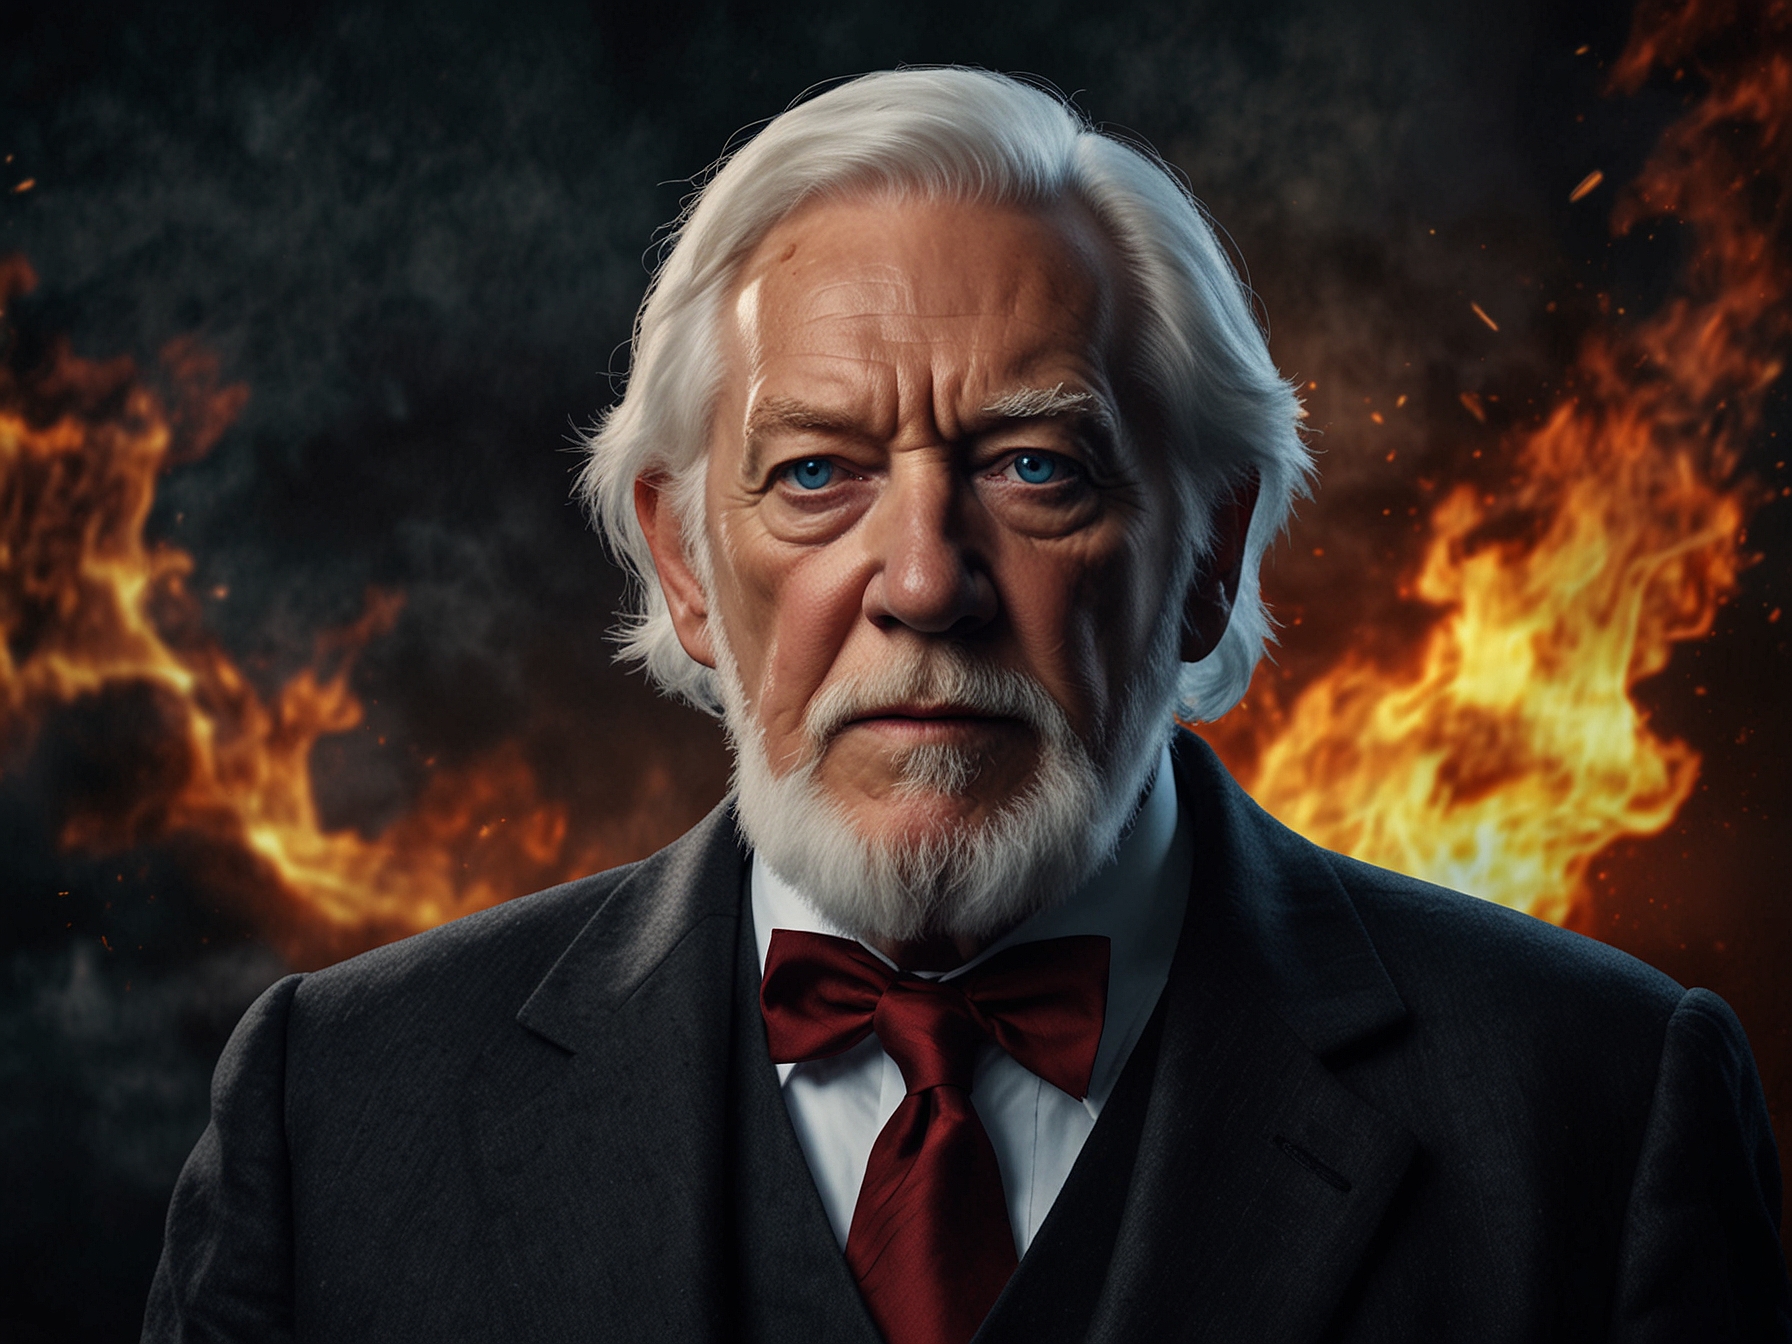 Donald Sutherland in his iconic role as President Snow from The Hunger Games series, showcasing the chilling and authoritative demeanor that made the character unforgettable.